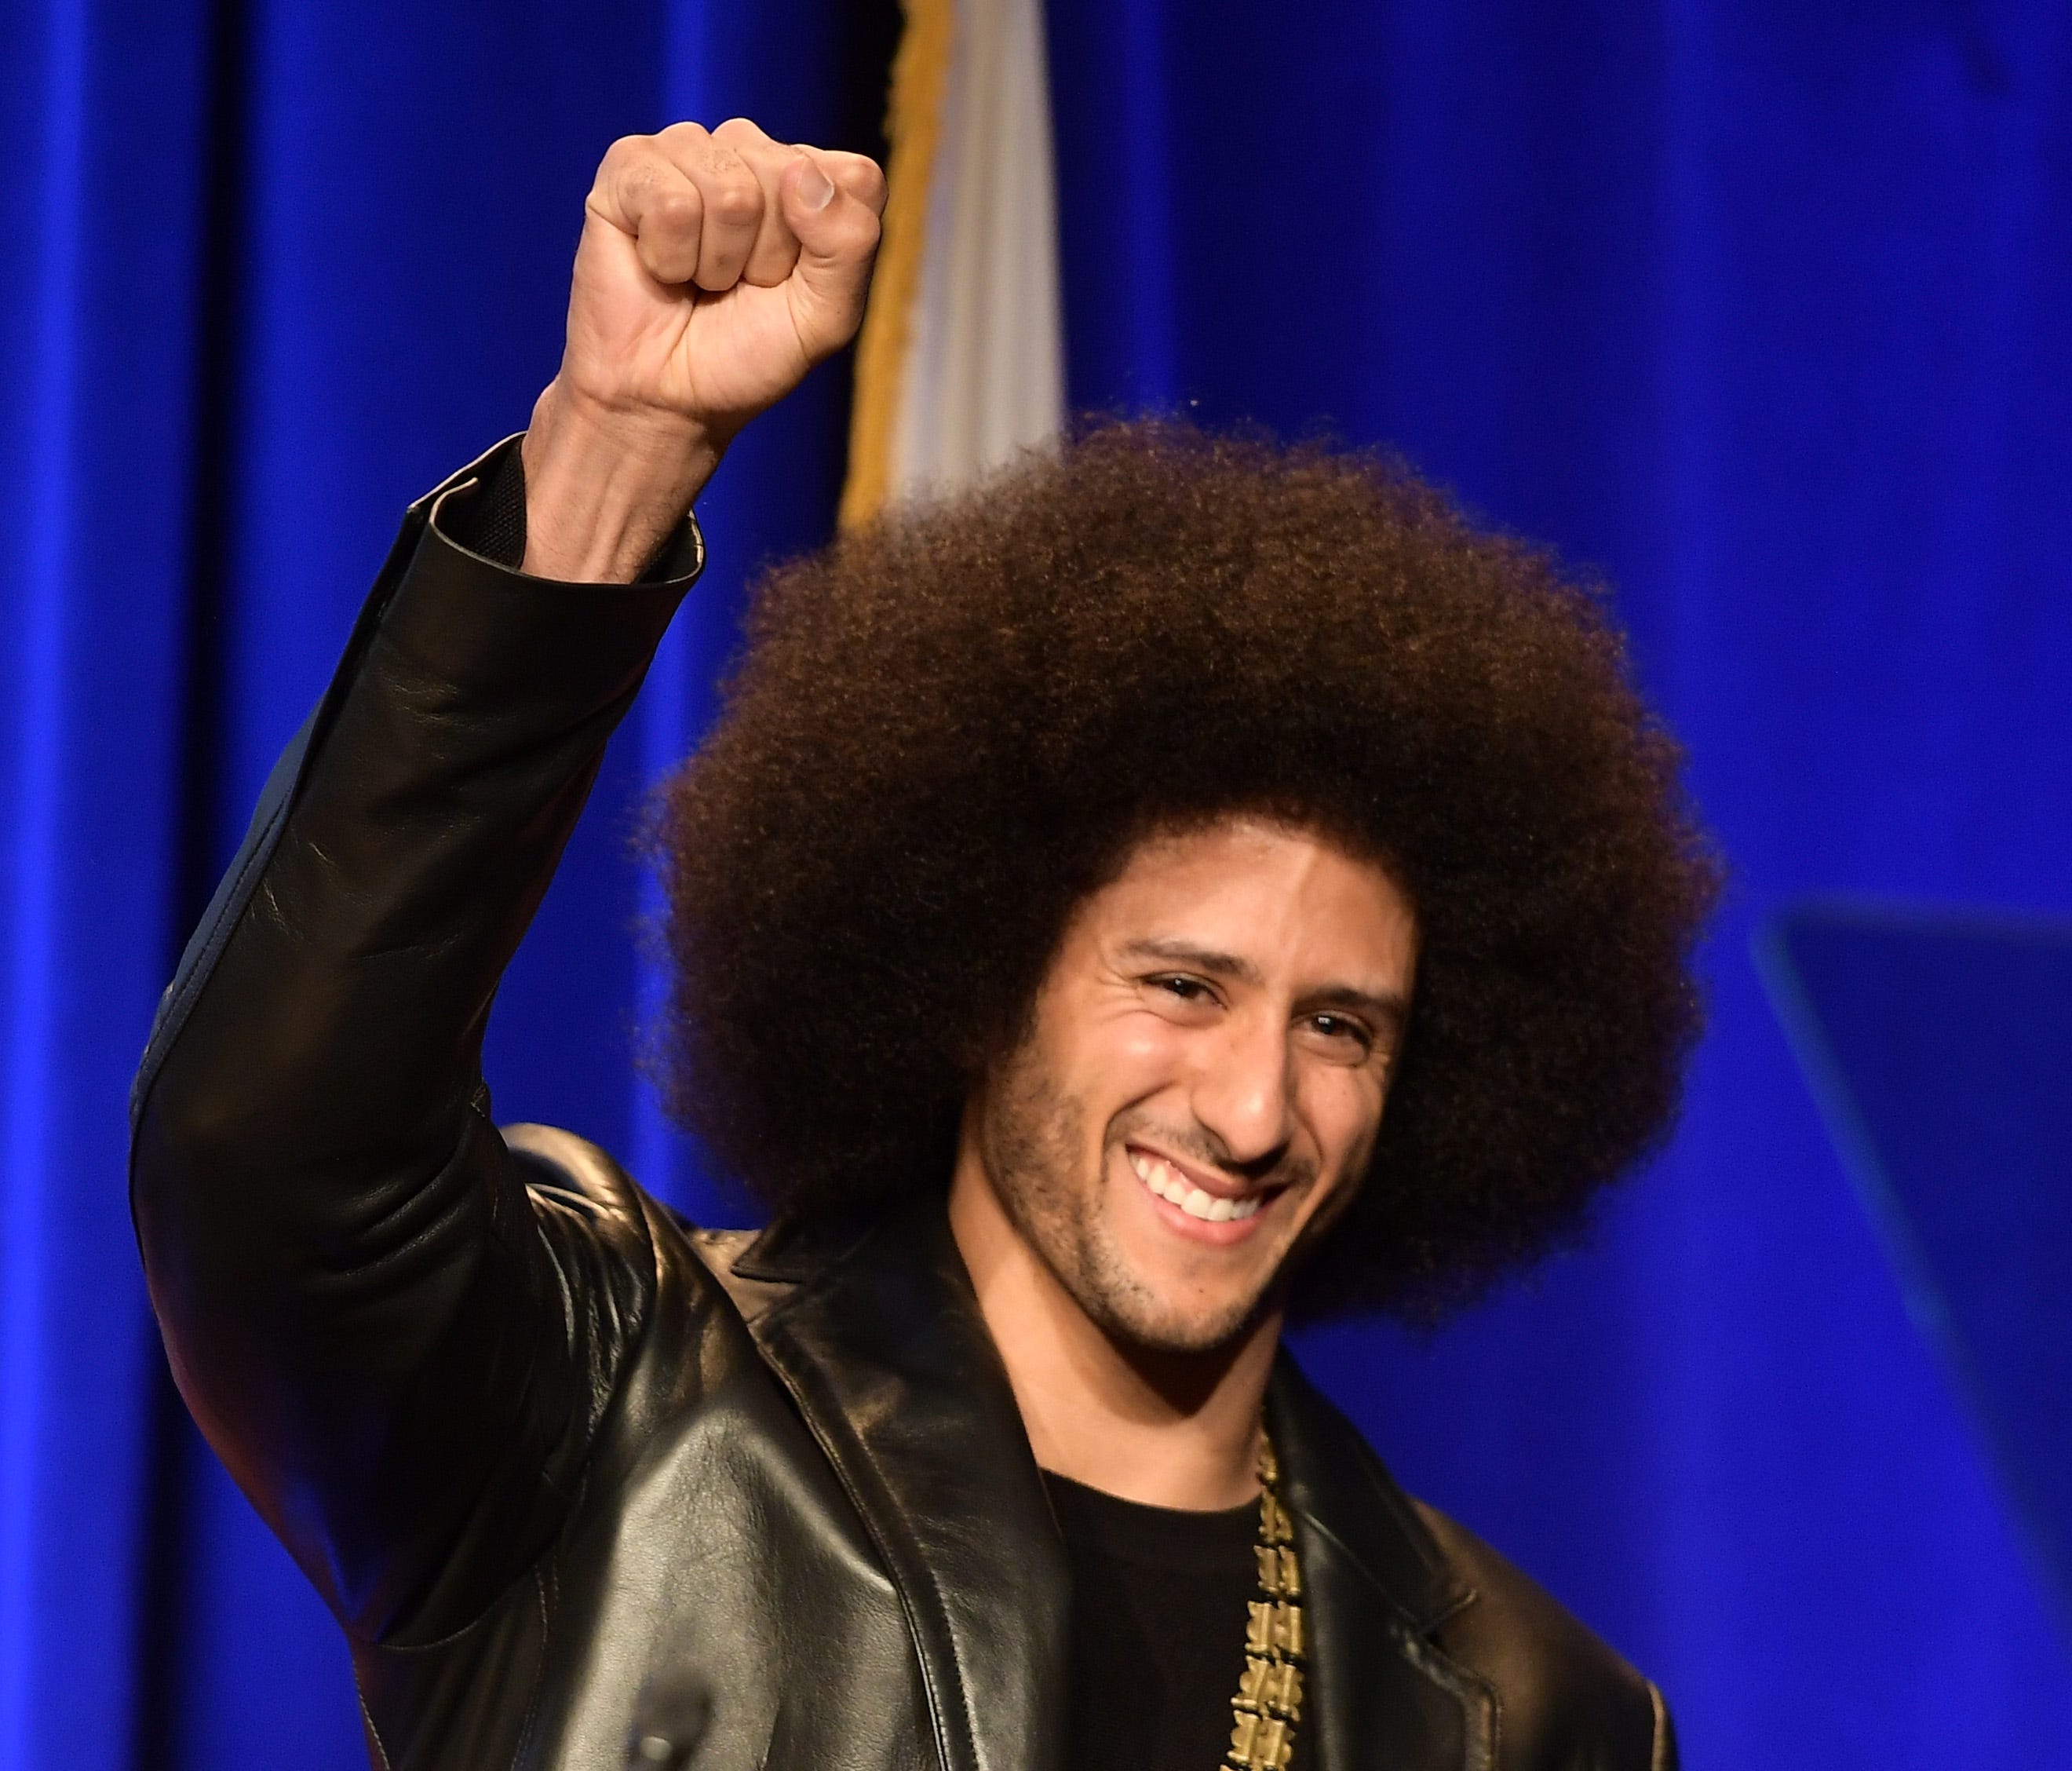 Colin Kaepernick hasn't played in the NFL since the 2016 season.